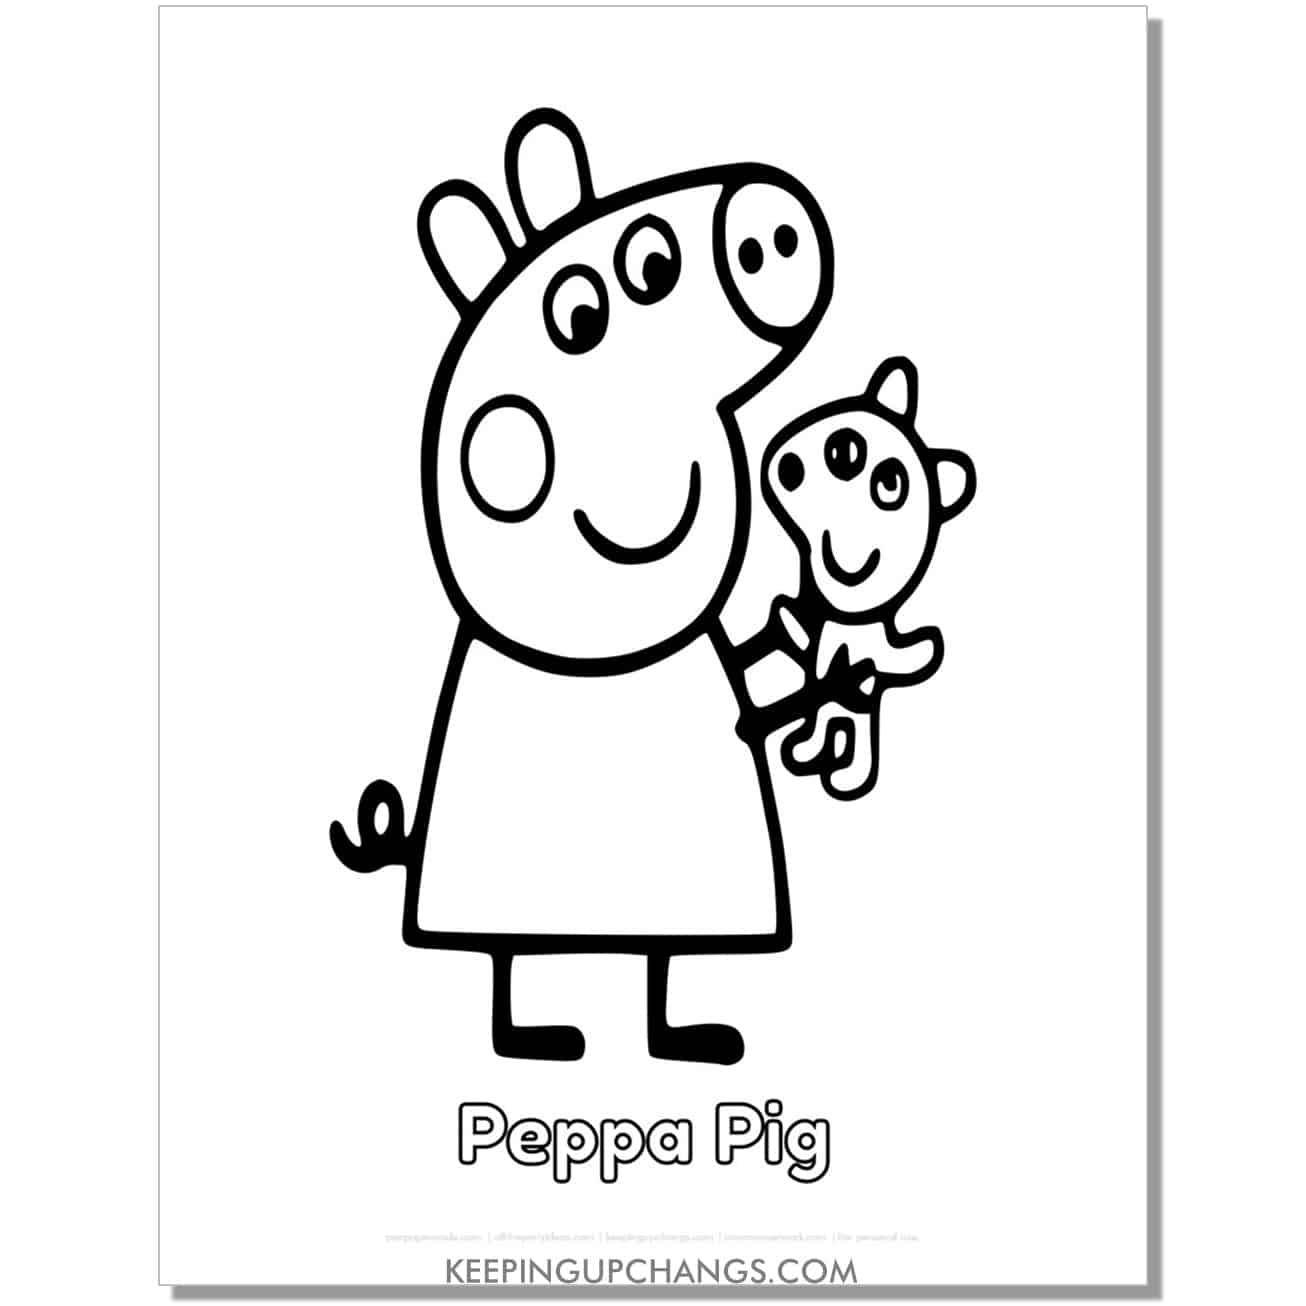 free peppa pig with doll coloring page, sheet.